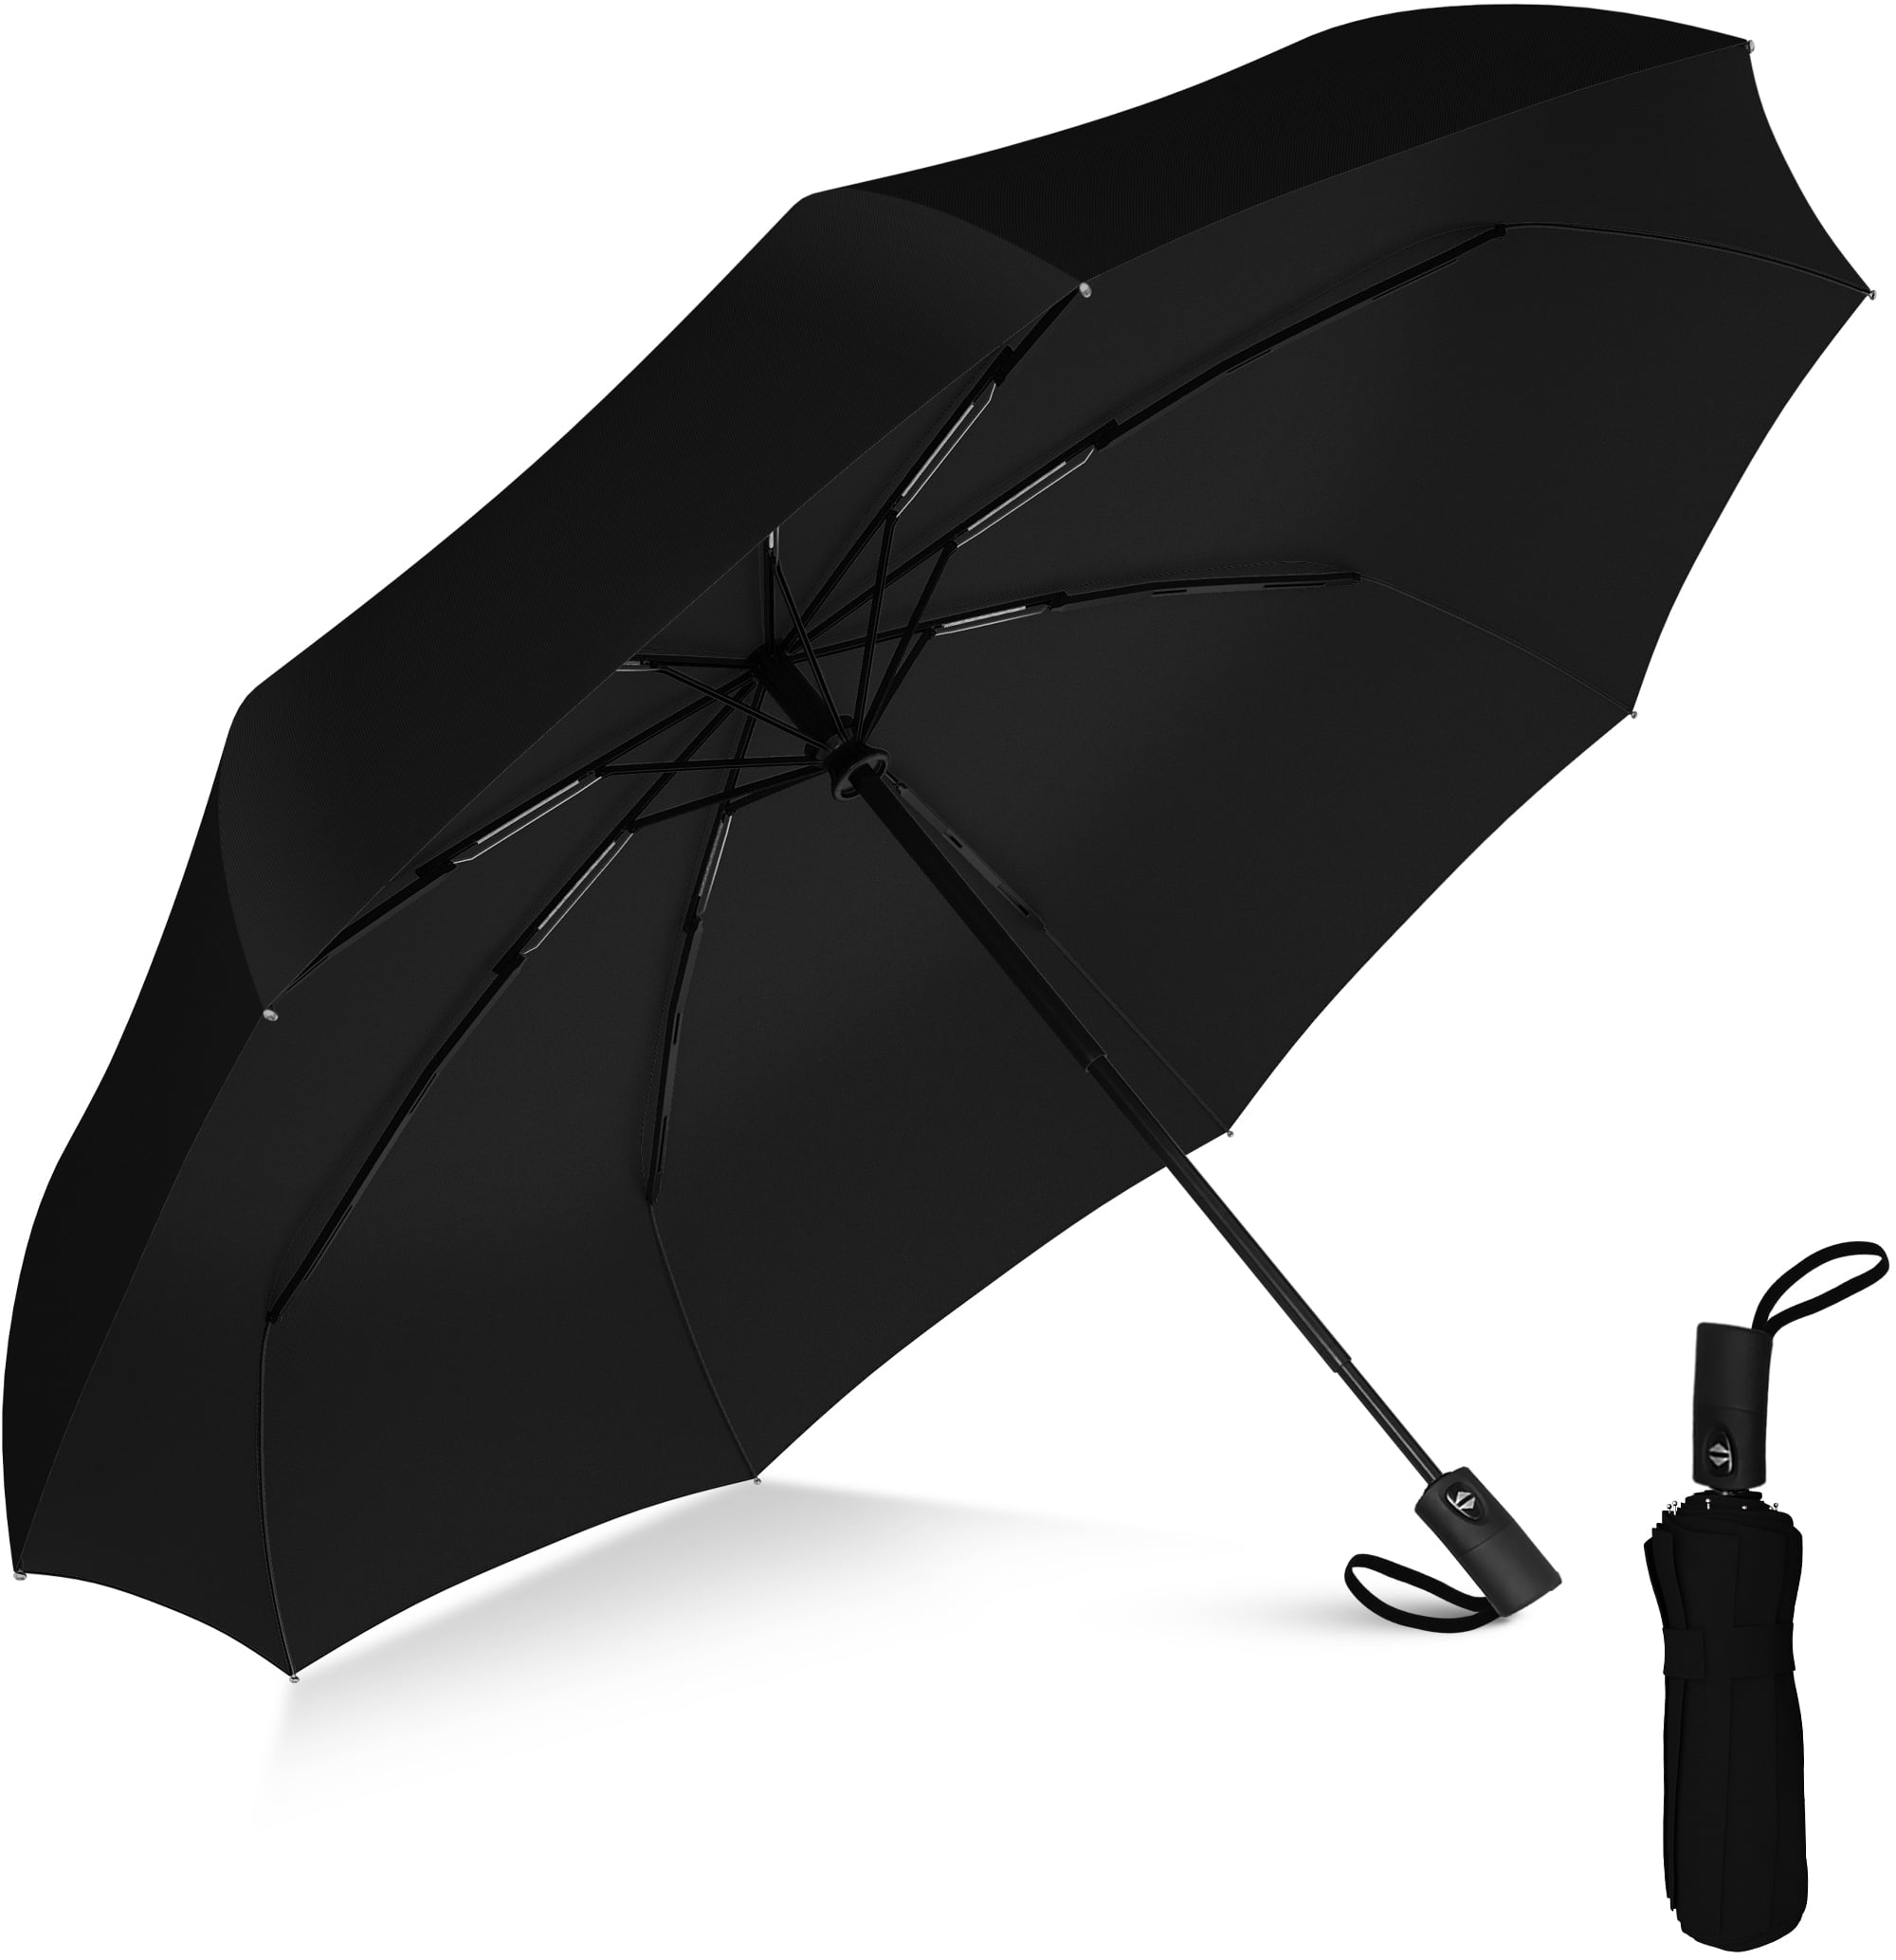 Color : Black, Size : 43 inches in diameter Umbrellas Football Long handle waterproof Double cloth glass fiber Strong wind resists heavy rain 